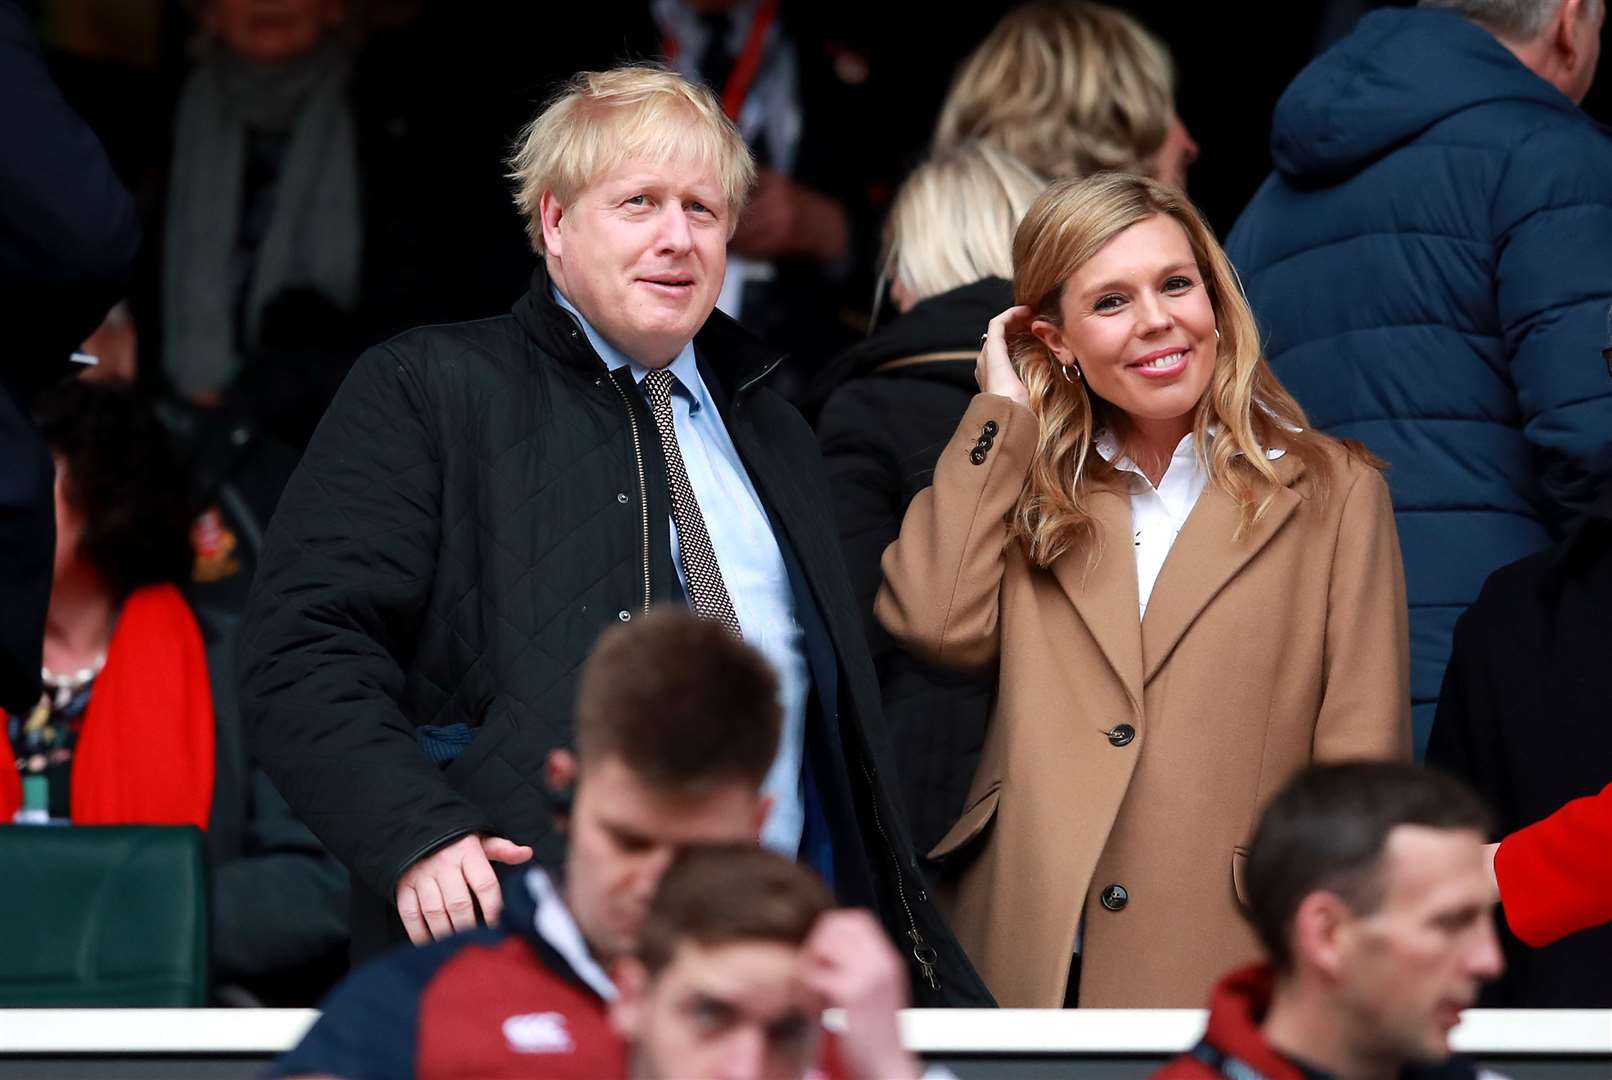 The couple were spotted in the stands during the Guinness Six Nations match at Twickenham shortly after the news they were to become parents (Adam Davy/PA)